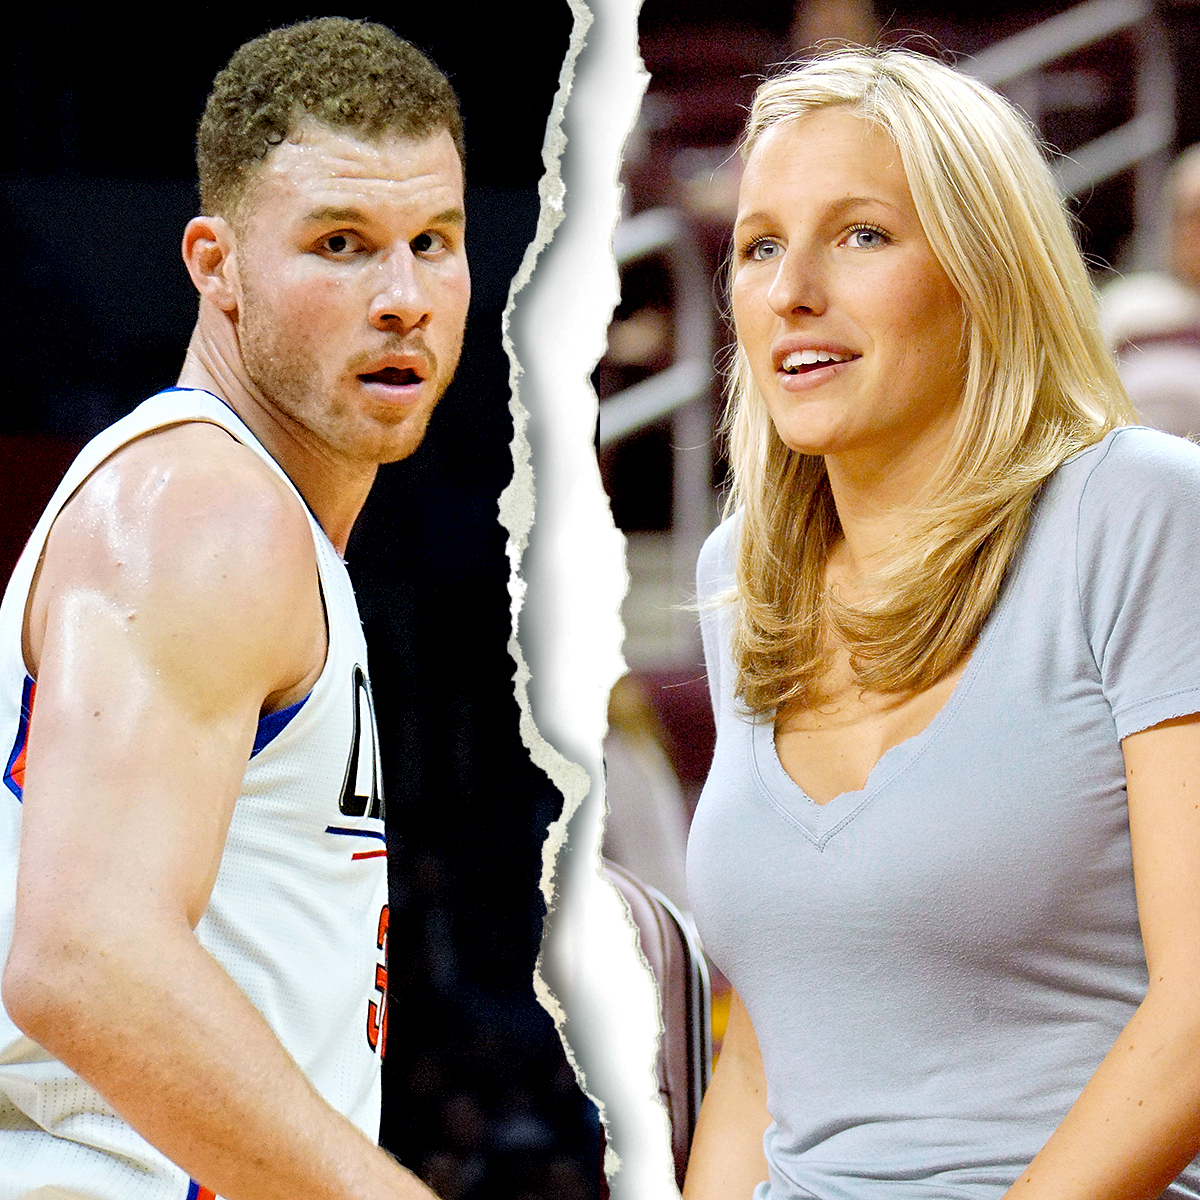 Blake Griffin's Girlfriend: A Look At The Athlete's Dating History